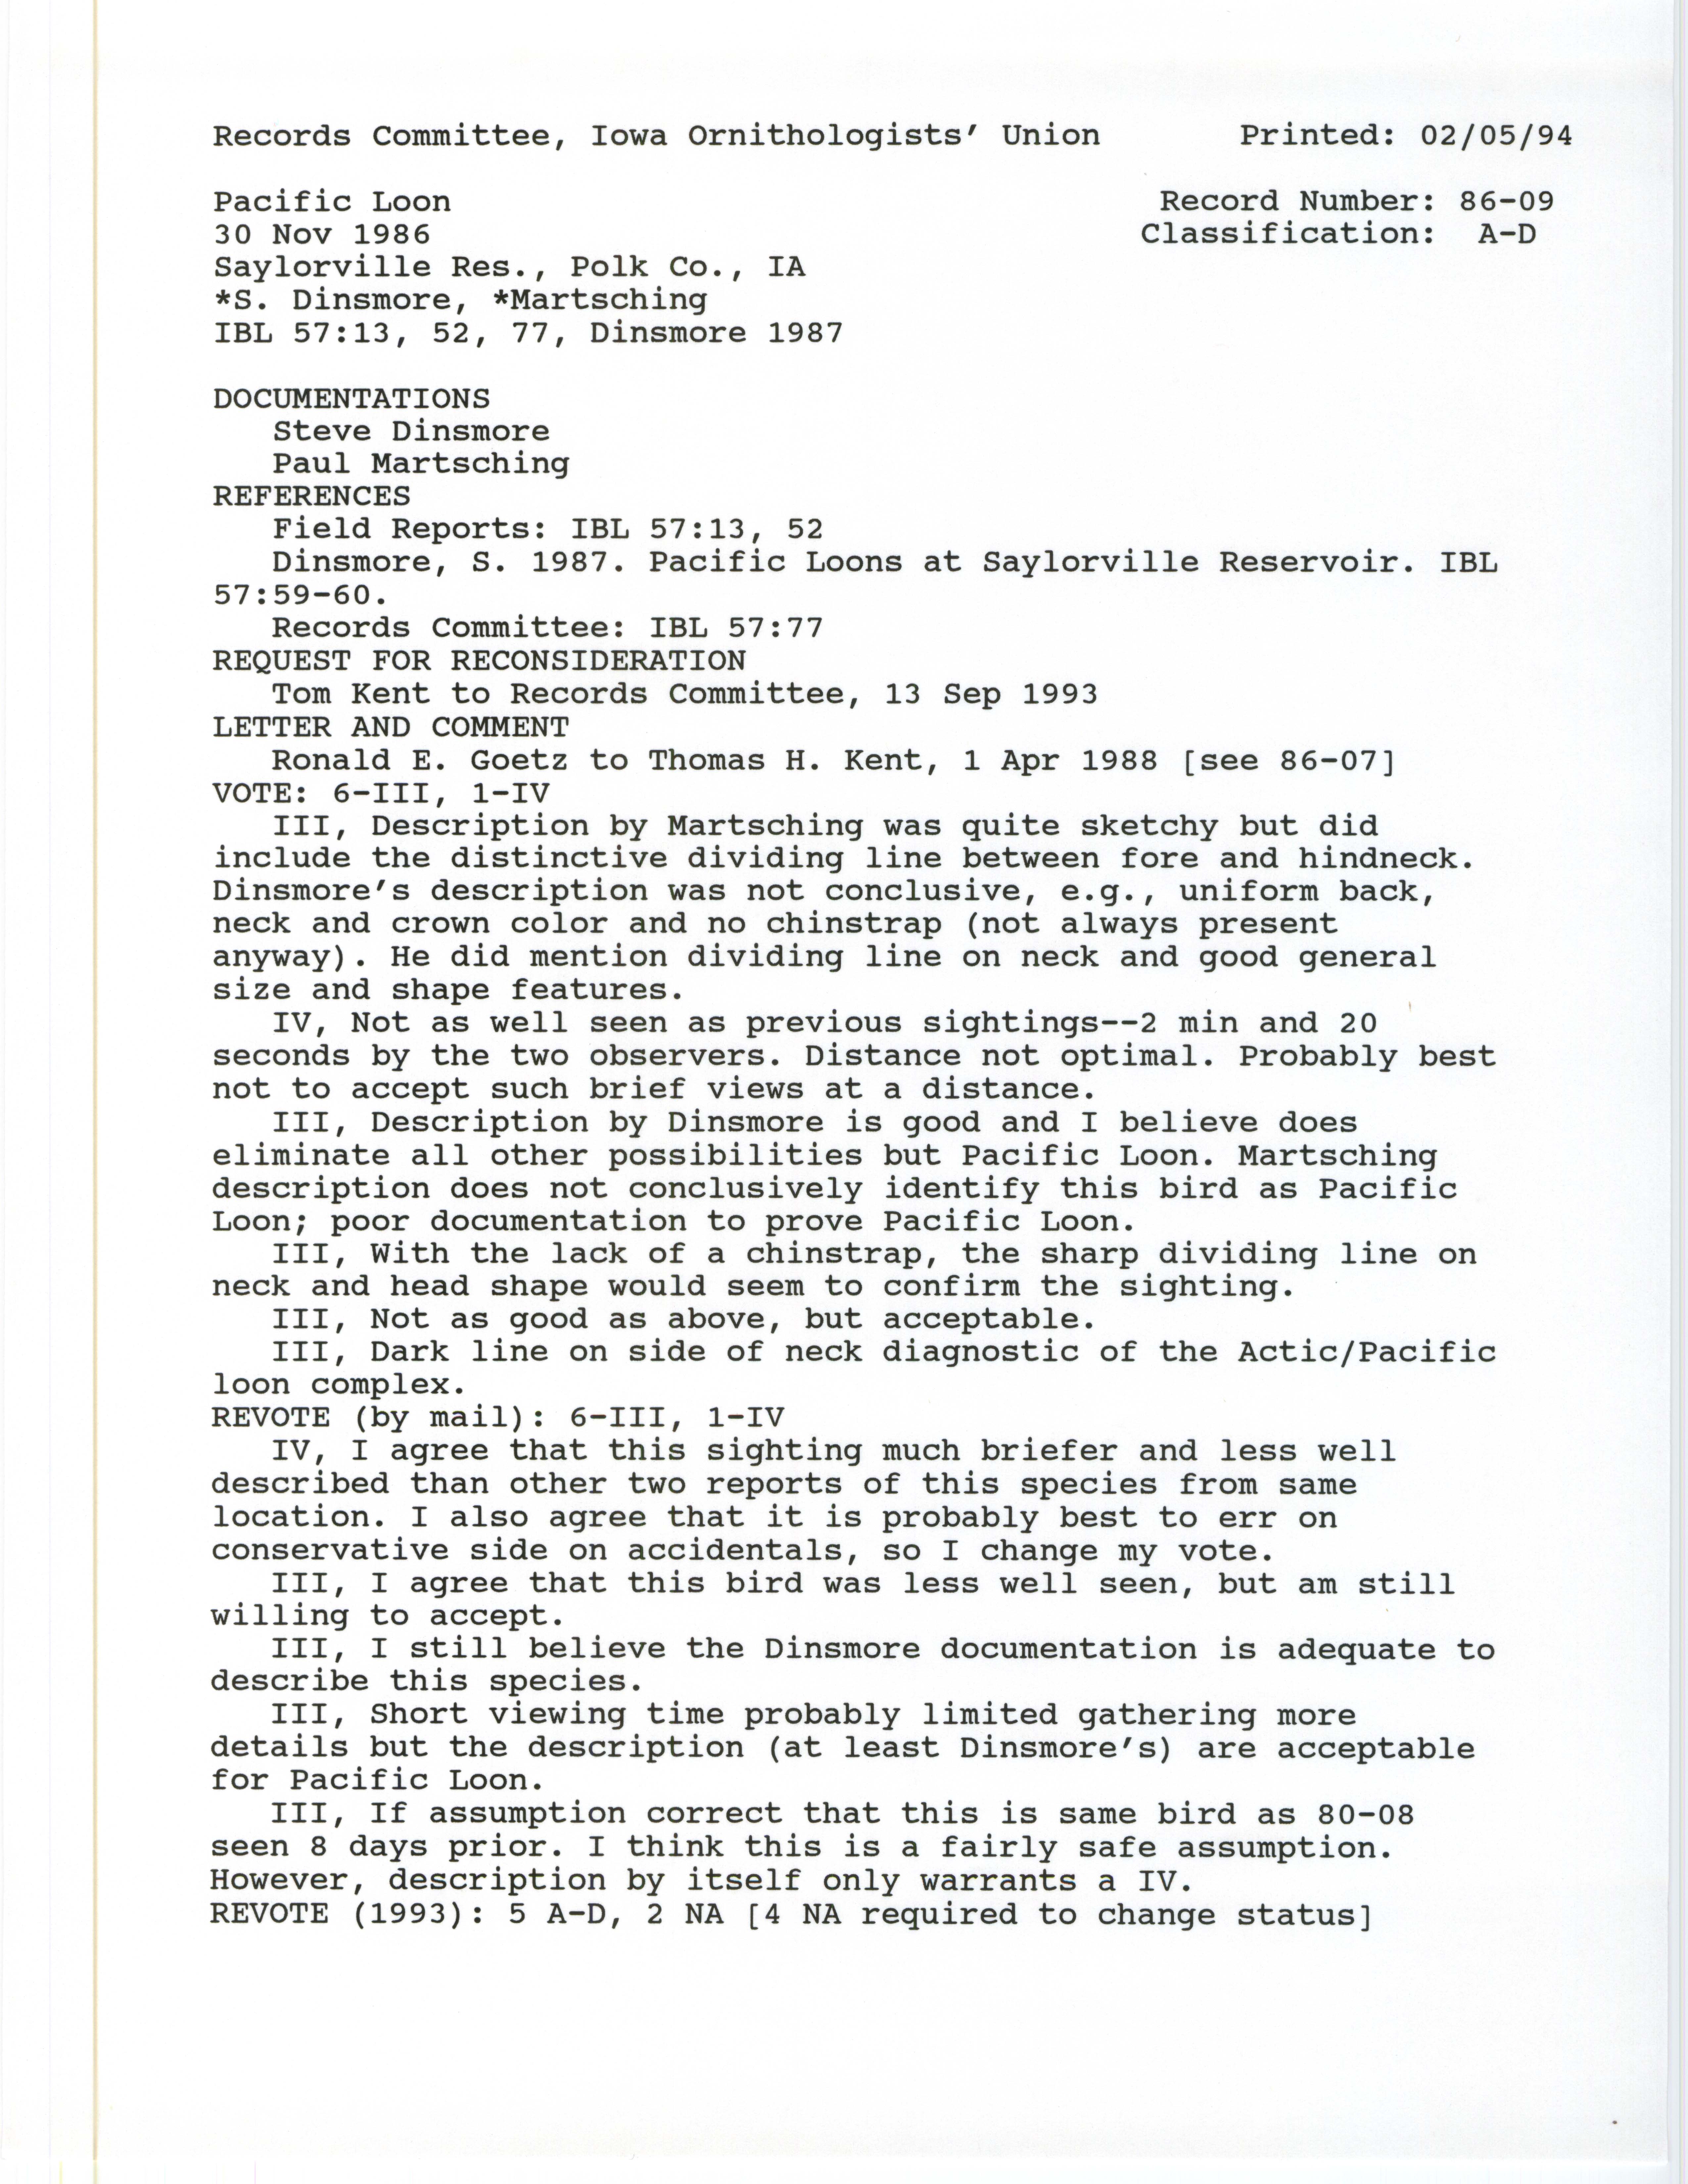 Records Committee review for rare bird sighting of Pacific Loon at Saylorville Reservoir, 1986